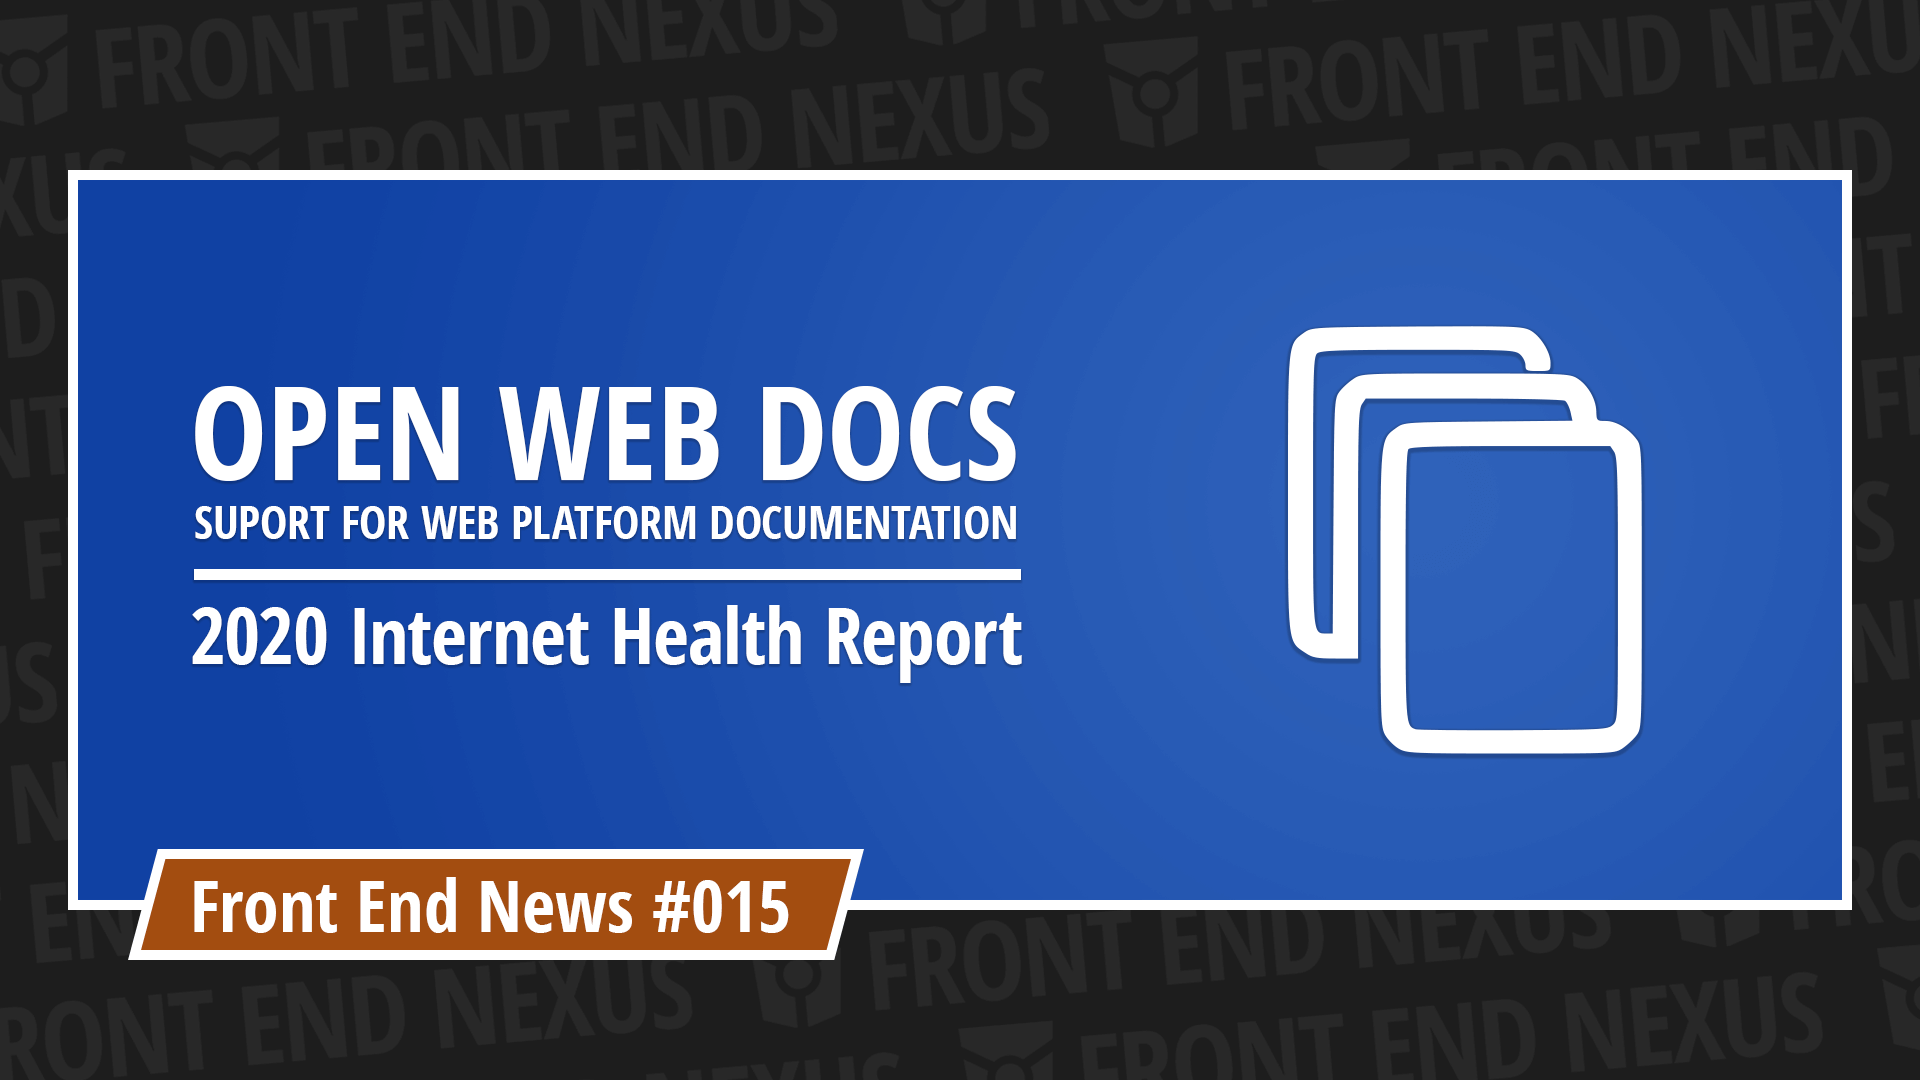 Introducing Open Web Docs, the 2020 Internet Health Report, WebRTC and Firefox 85 | Front End News #015